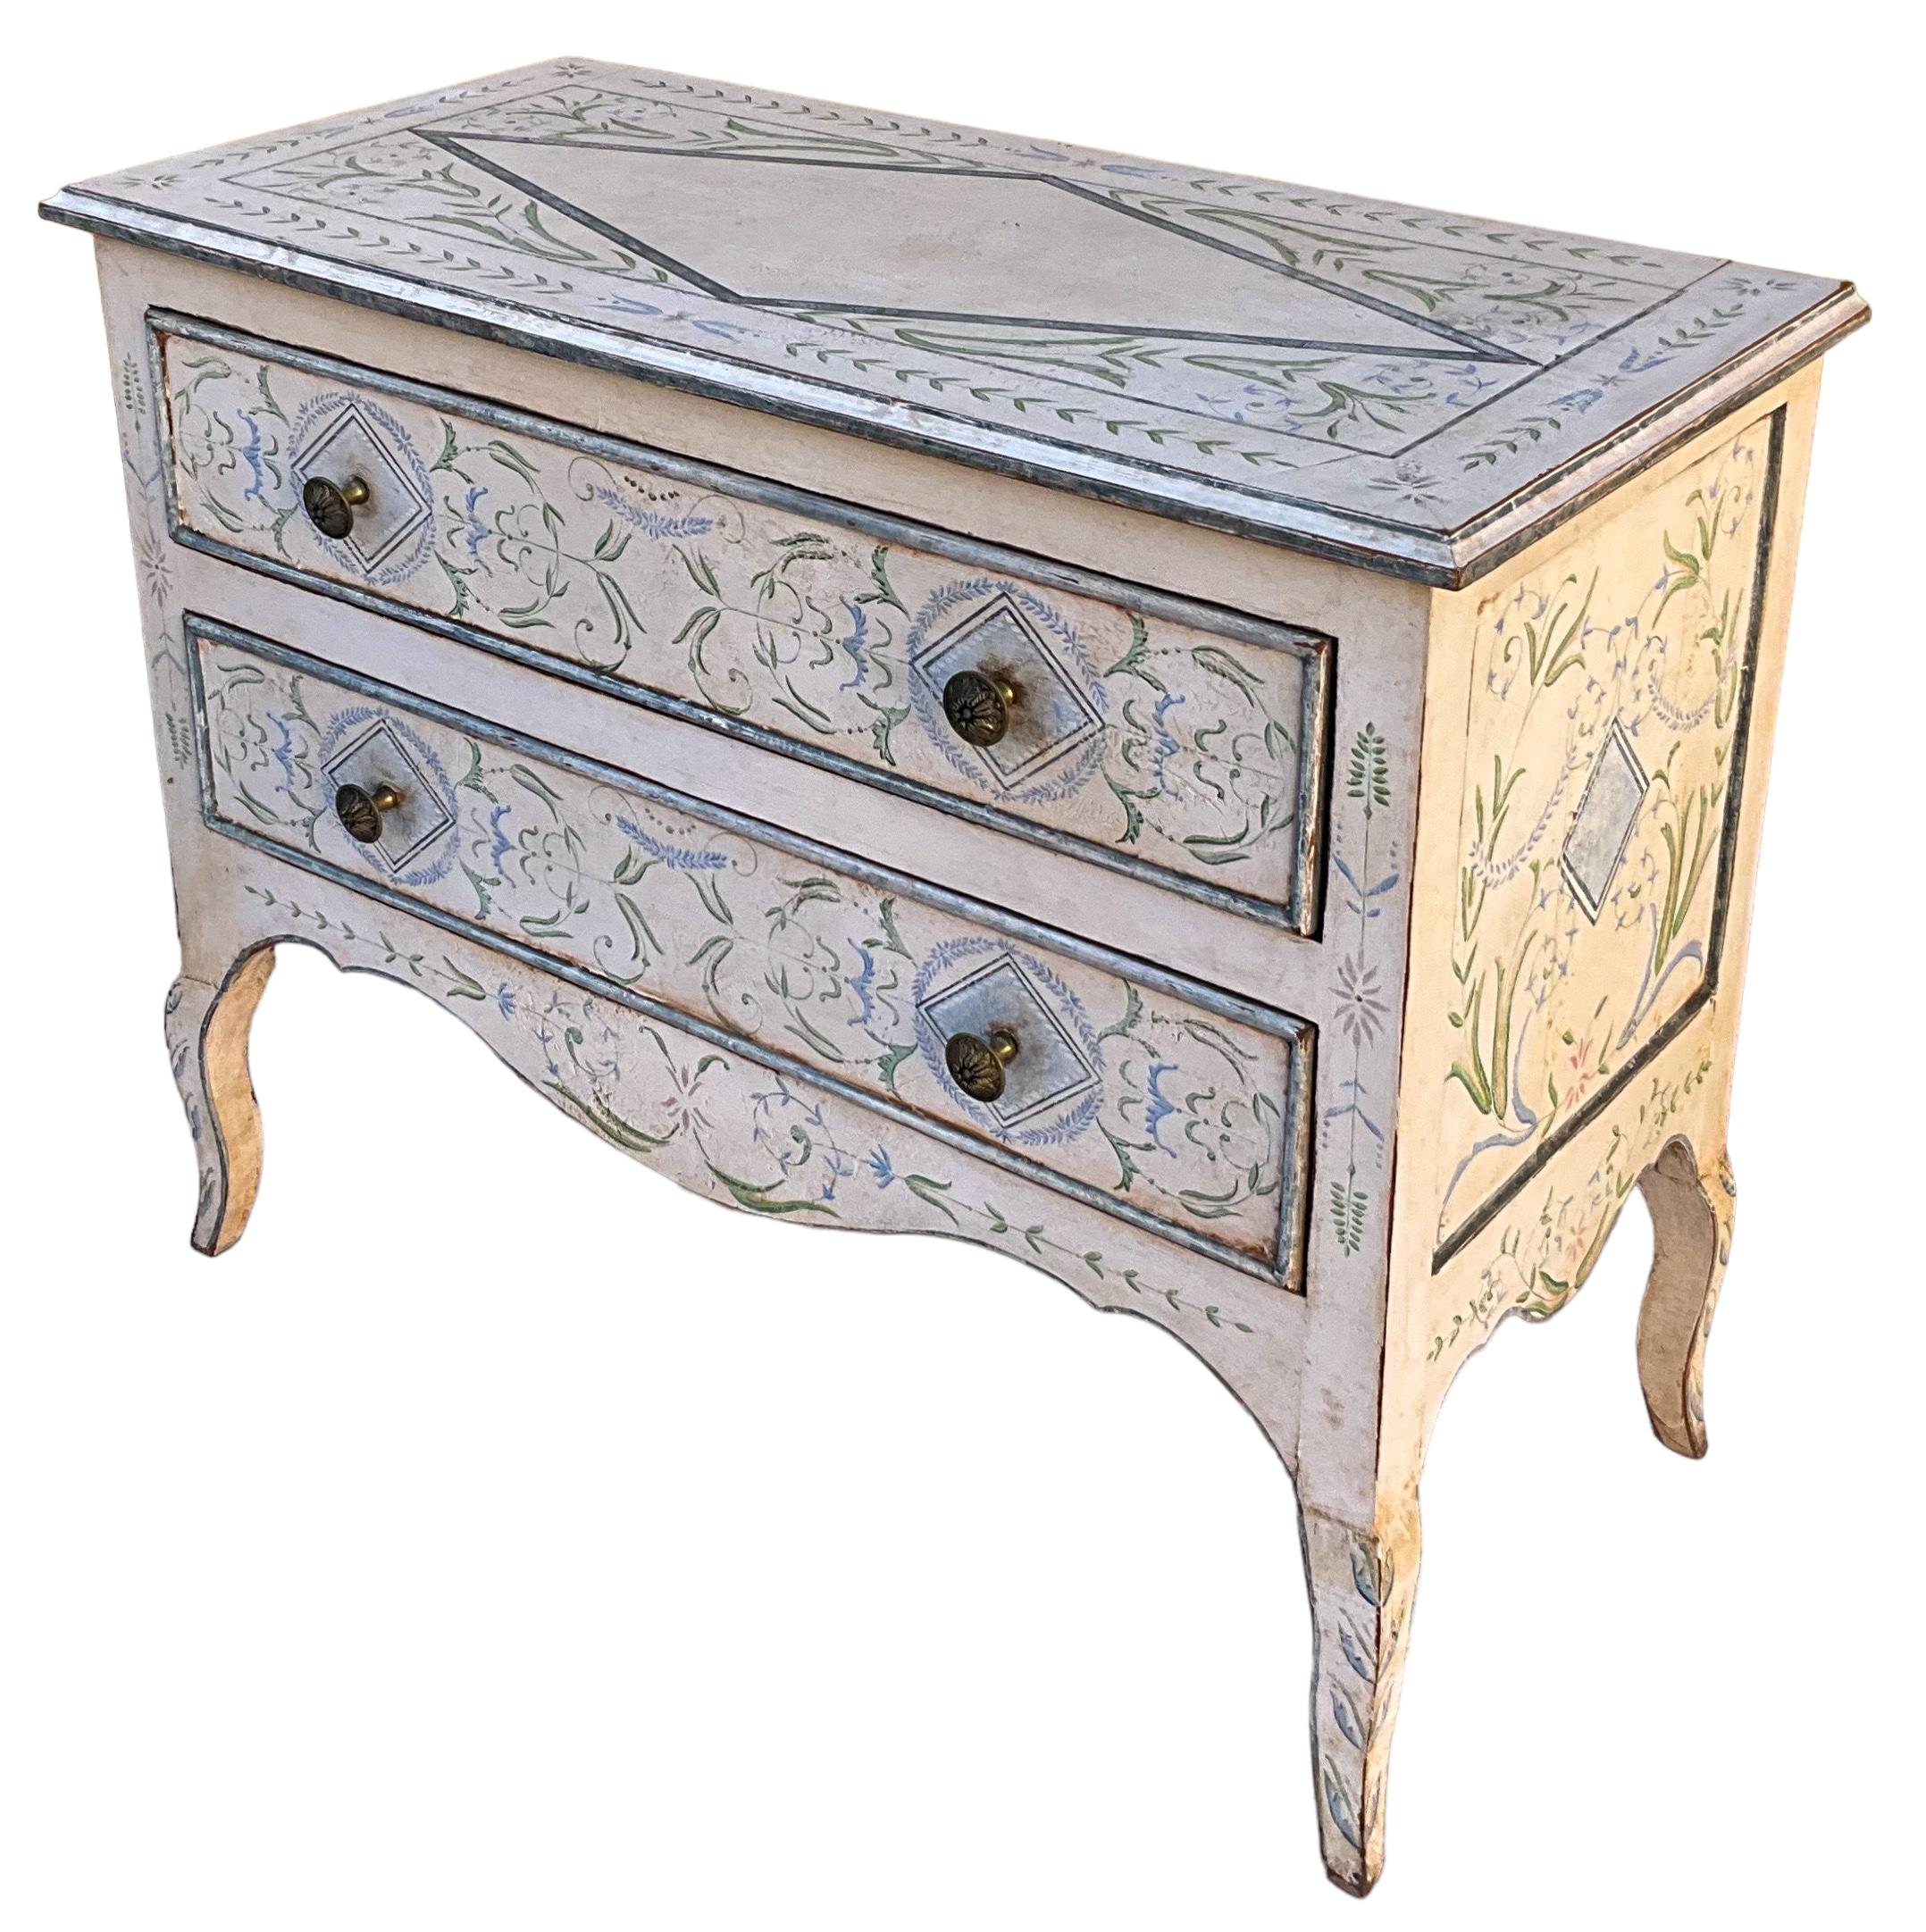 This is a hand painted Italian commode with lovely Gustavian styling.  It is intentionally and heavily distressed. The drawers are paper lined.  I believe it to be a good reproduction and possibly by Niermann Weeks.